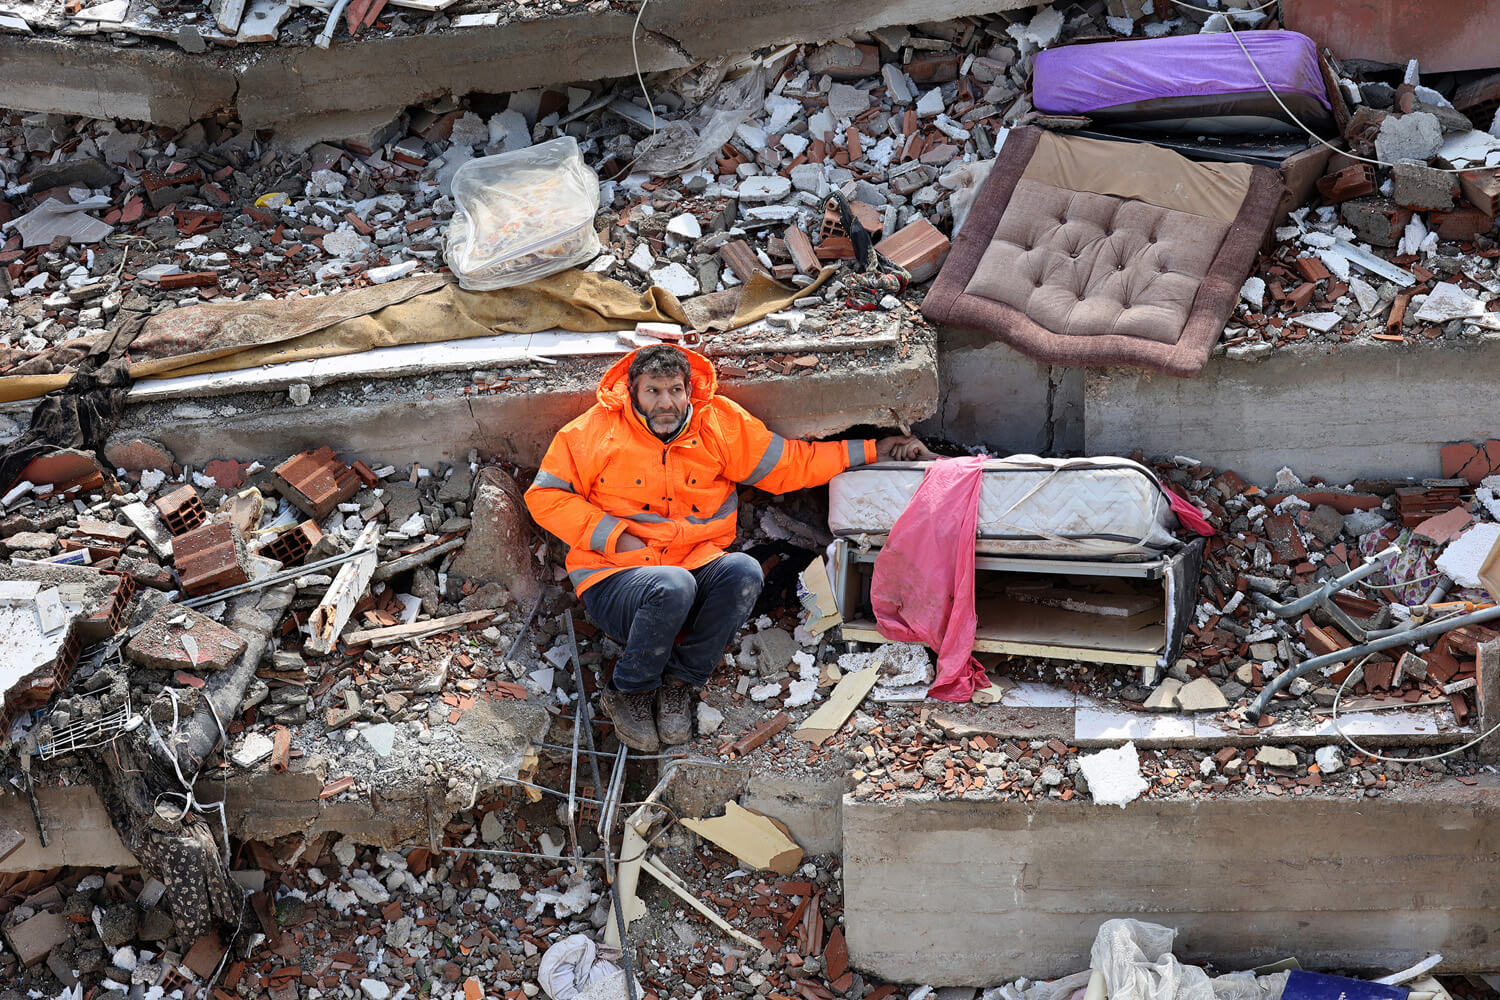 A man in a bright orange high-vis jacket sits amidst rubble, holding the hand that is protruding from beneath the concrete